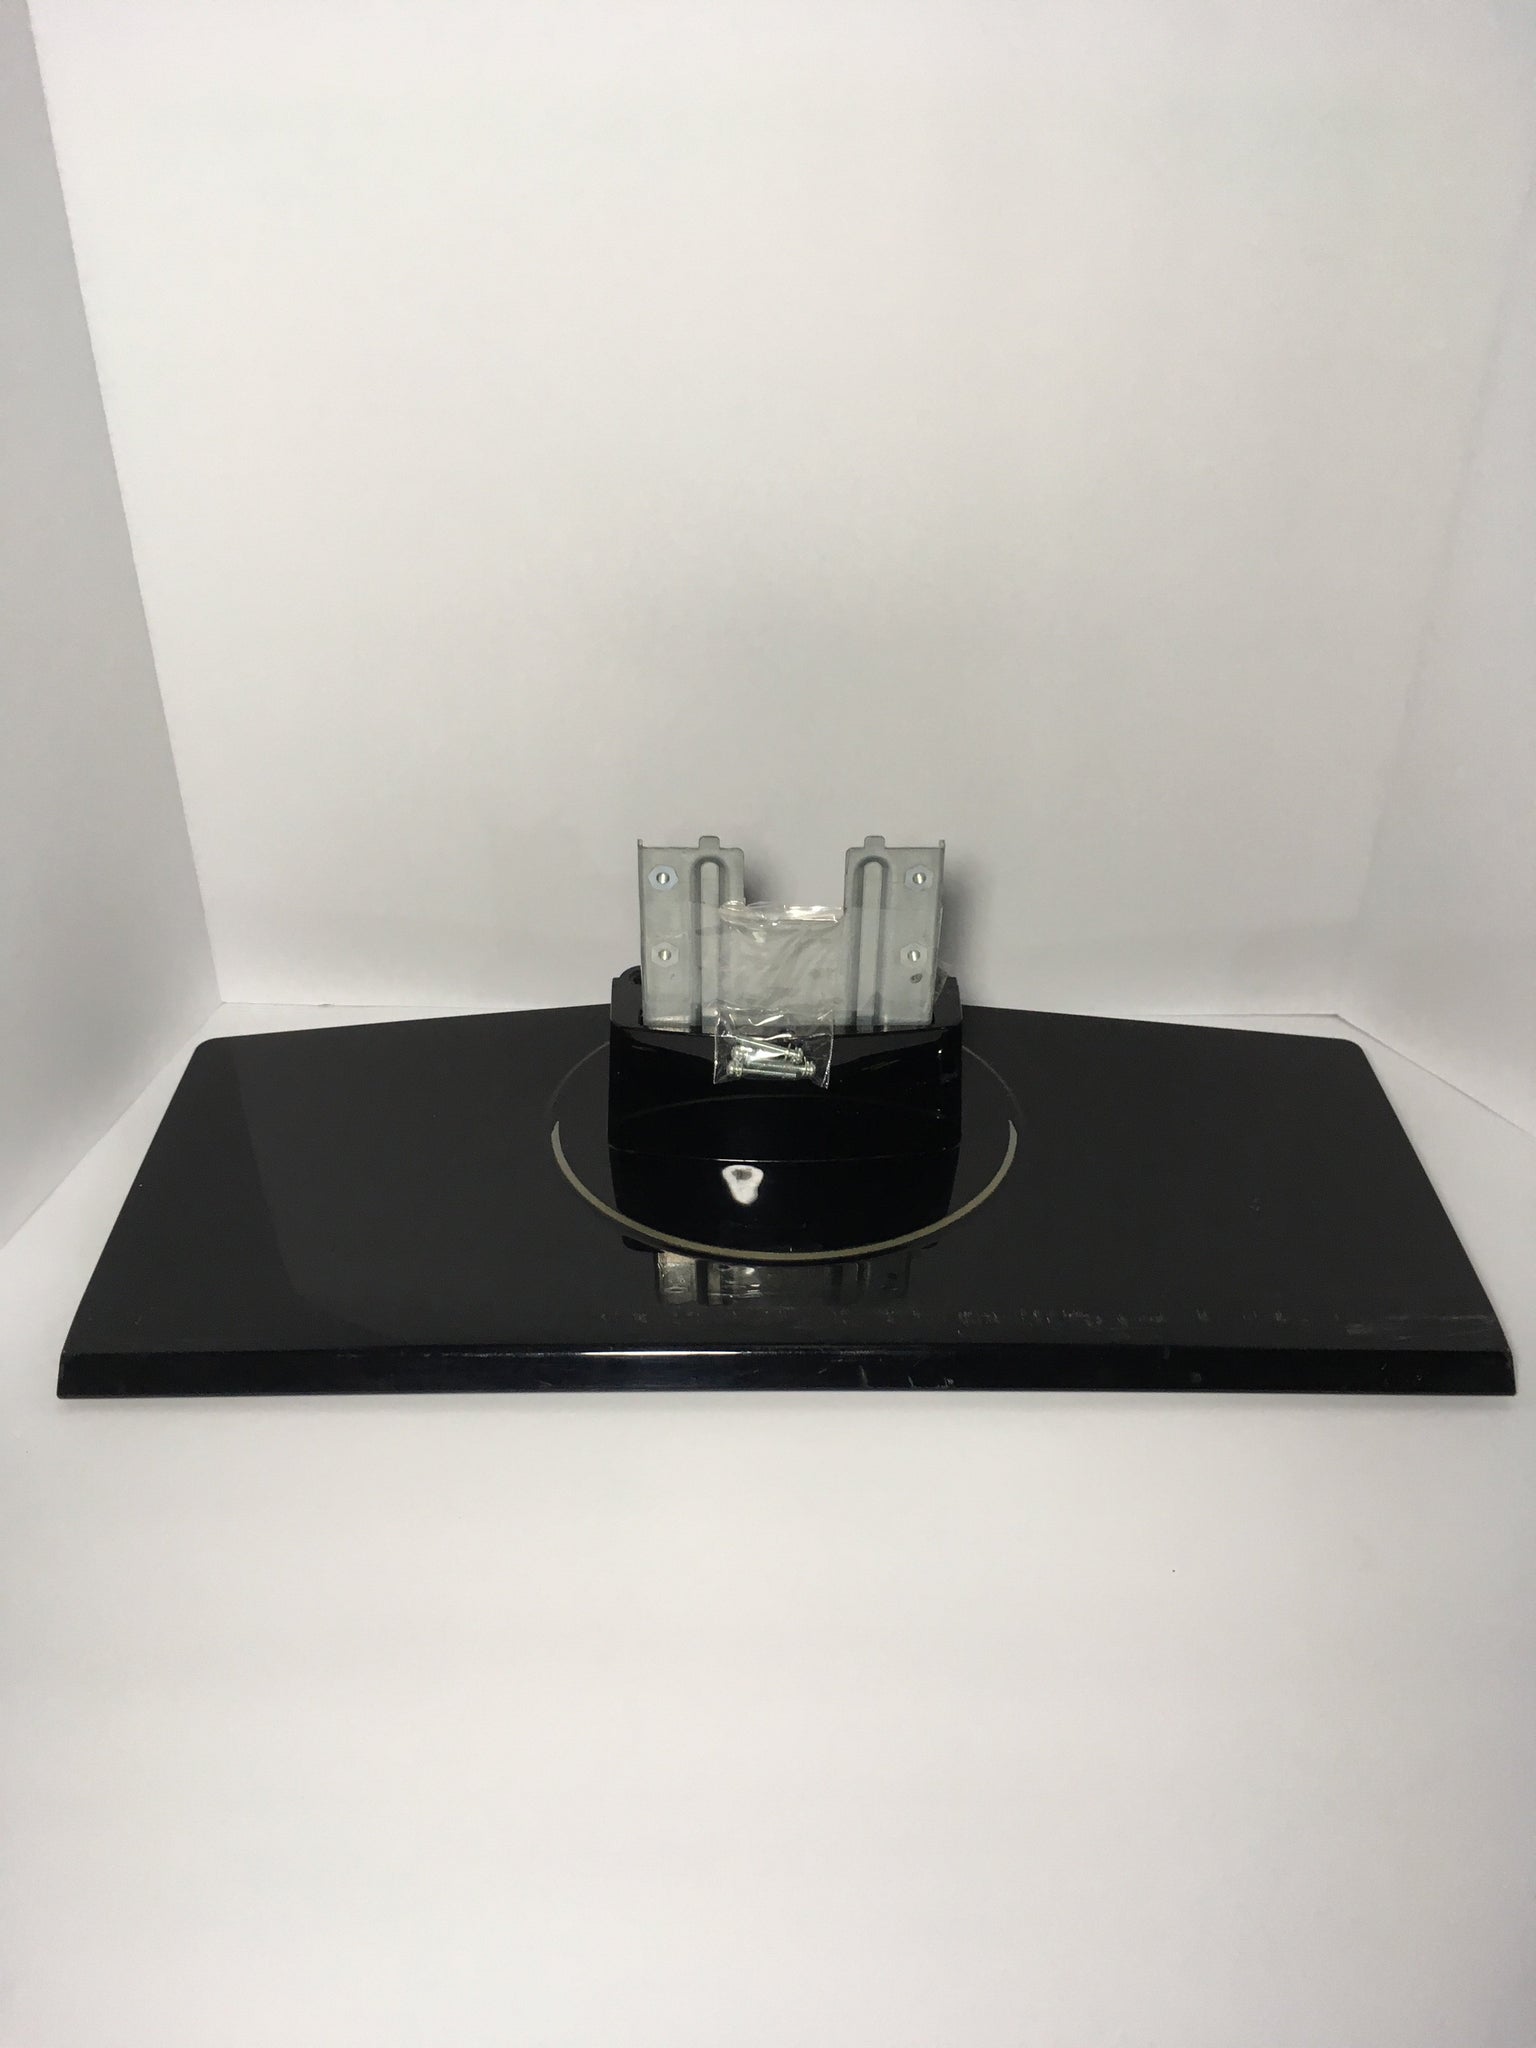 LG 32LC7D Stand Base